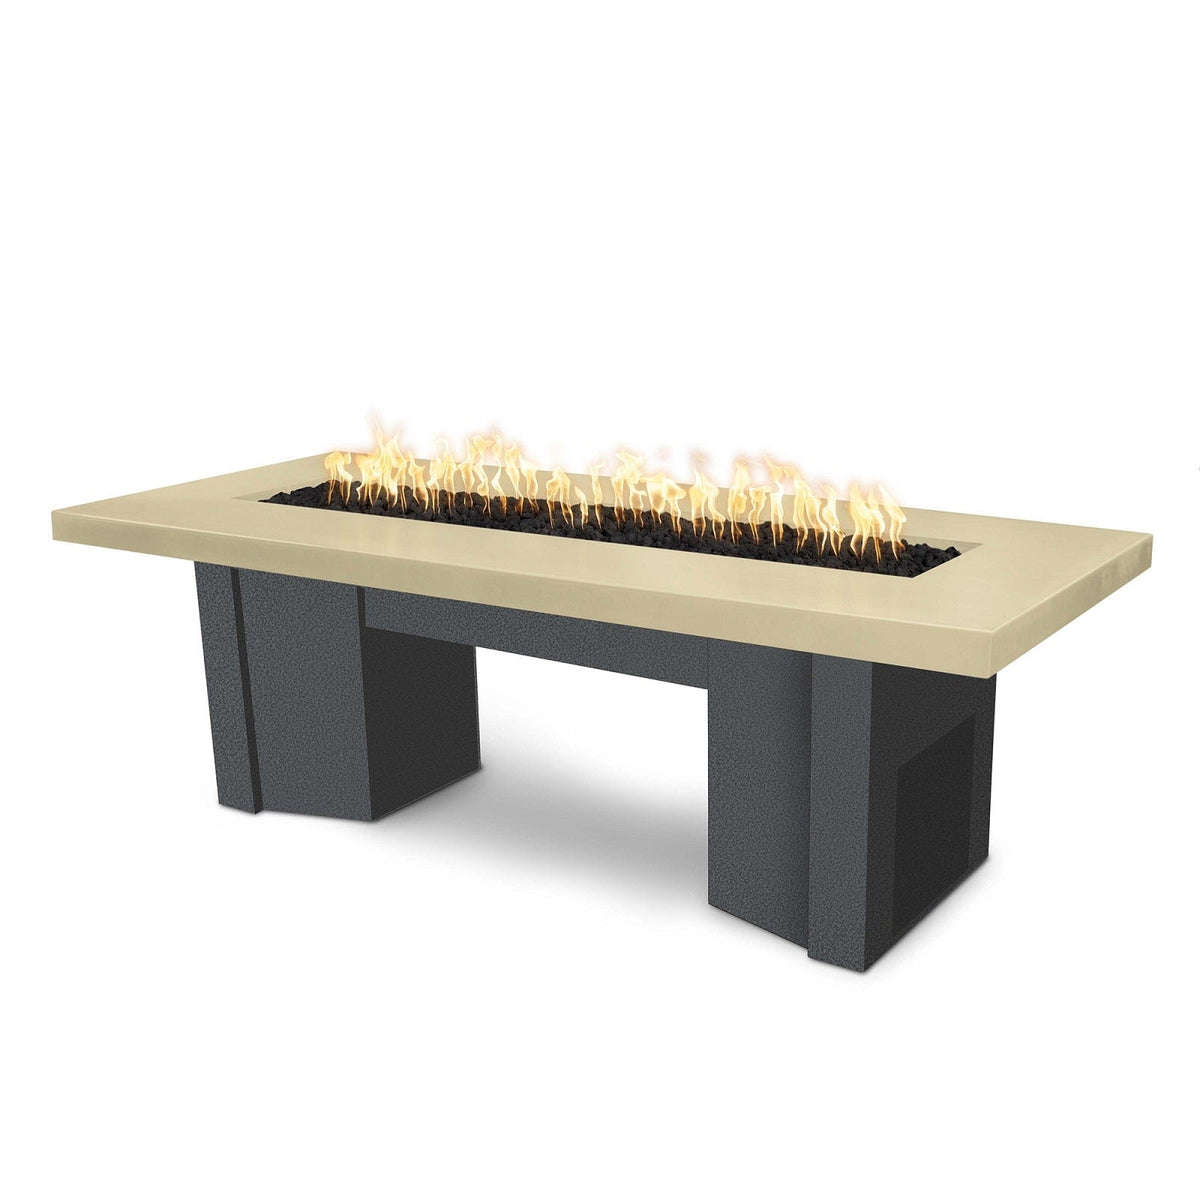 The Outdoor Plus Fire Features Vanilla (-VAN) / Silver Vein Powder Coated Steel (-SLV) The Outdoor Plus 78&quot; Alameda Fire Table Smooth Concrete in Liquid Propane - Flame Sense System with Push Button Spark Igniter / OPT-ALMGFRC78FSEN-LP